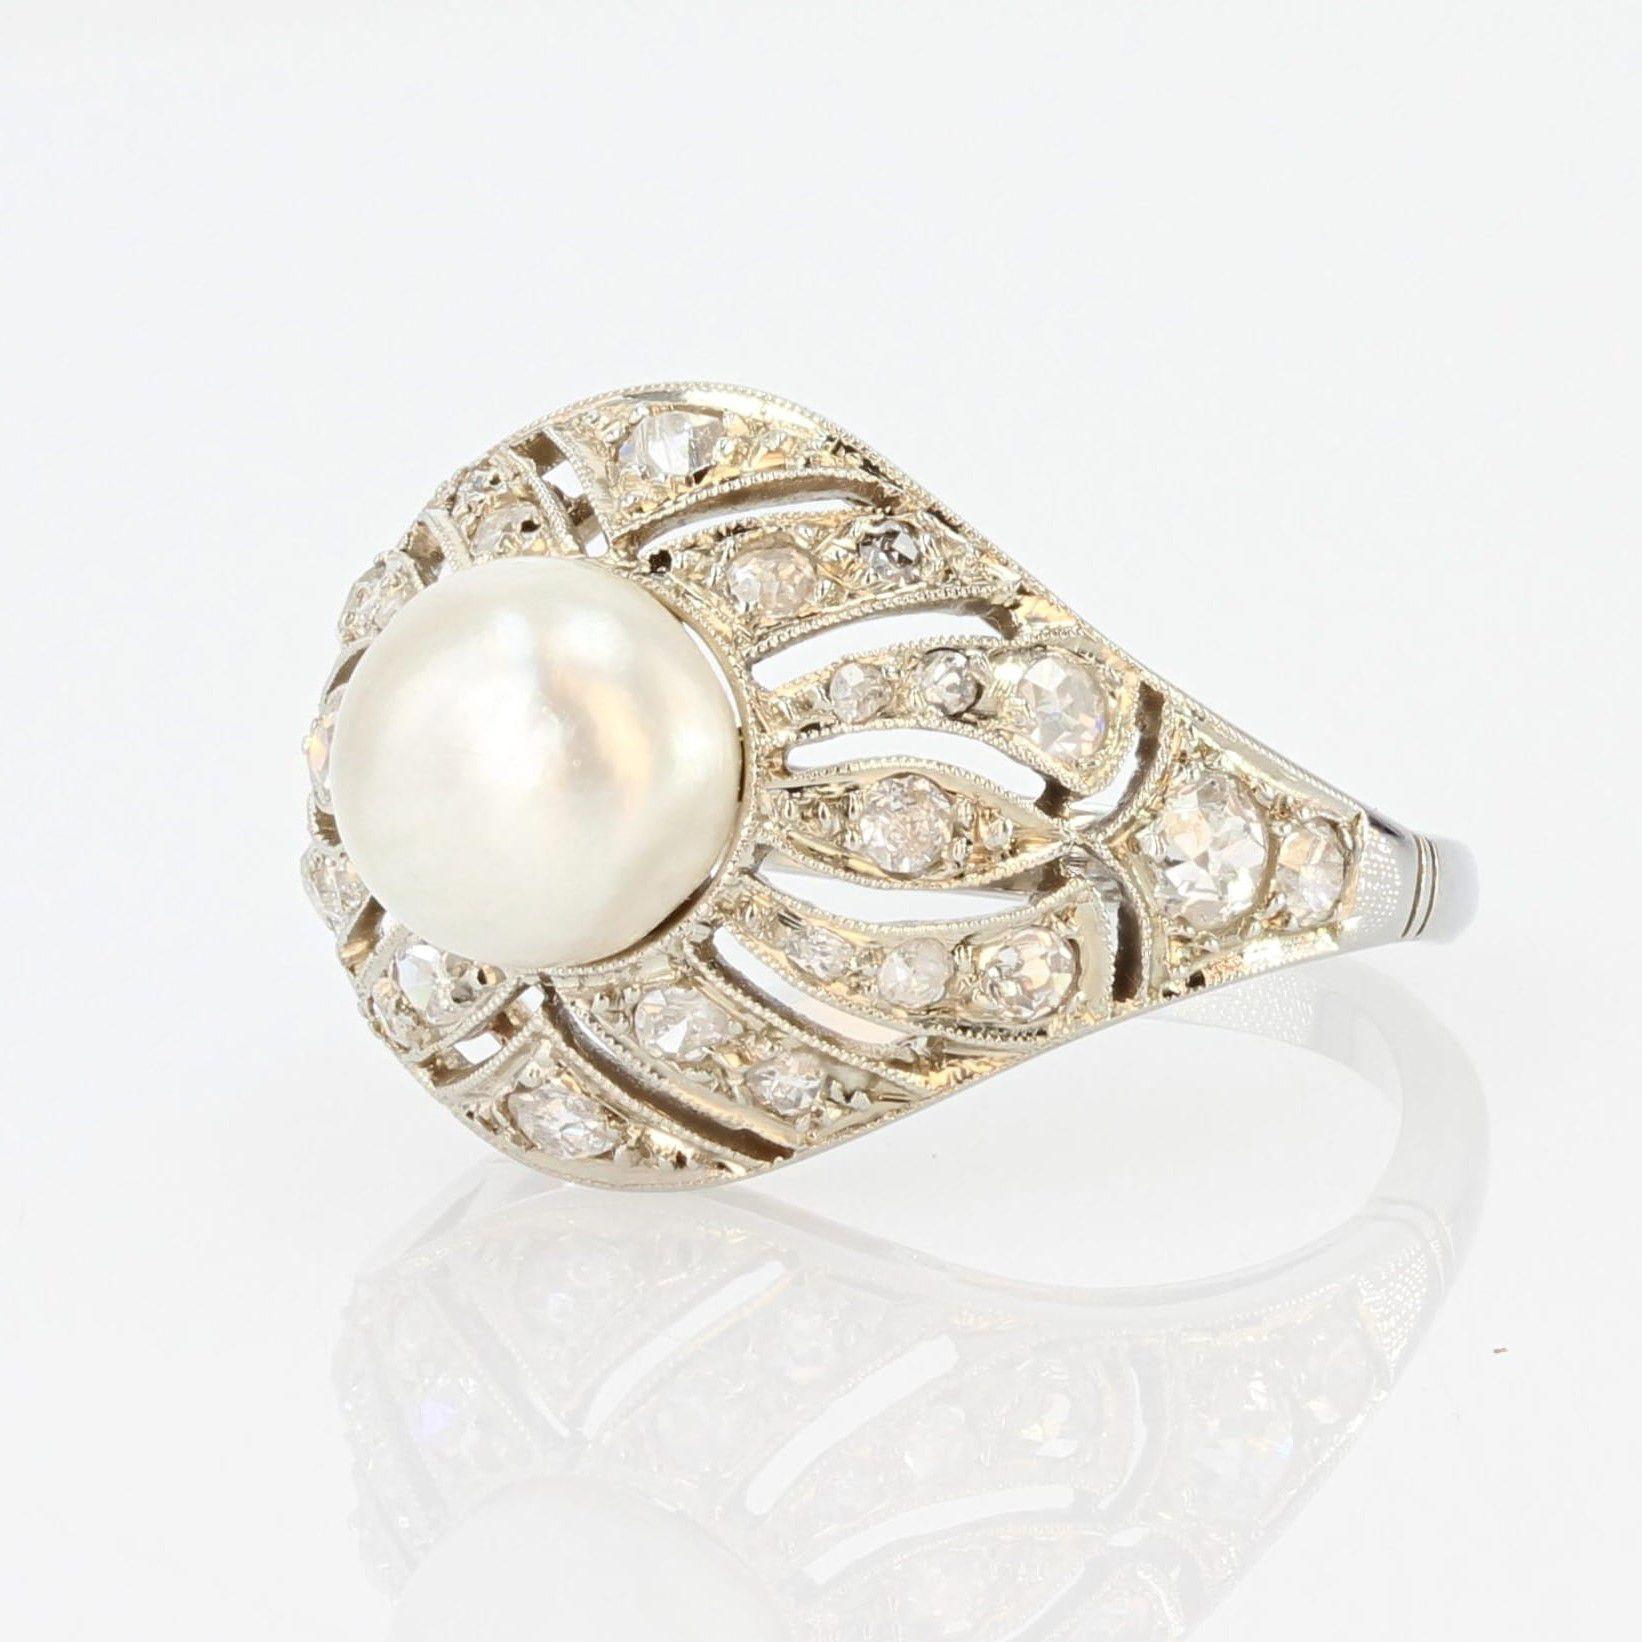 French 1930s Art Deco Certified Natural Pearl Diamonds 18 Karat White Gold Ring For Sale 1